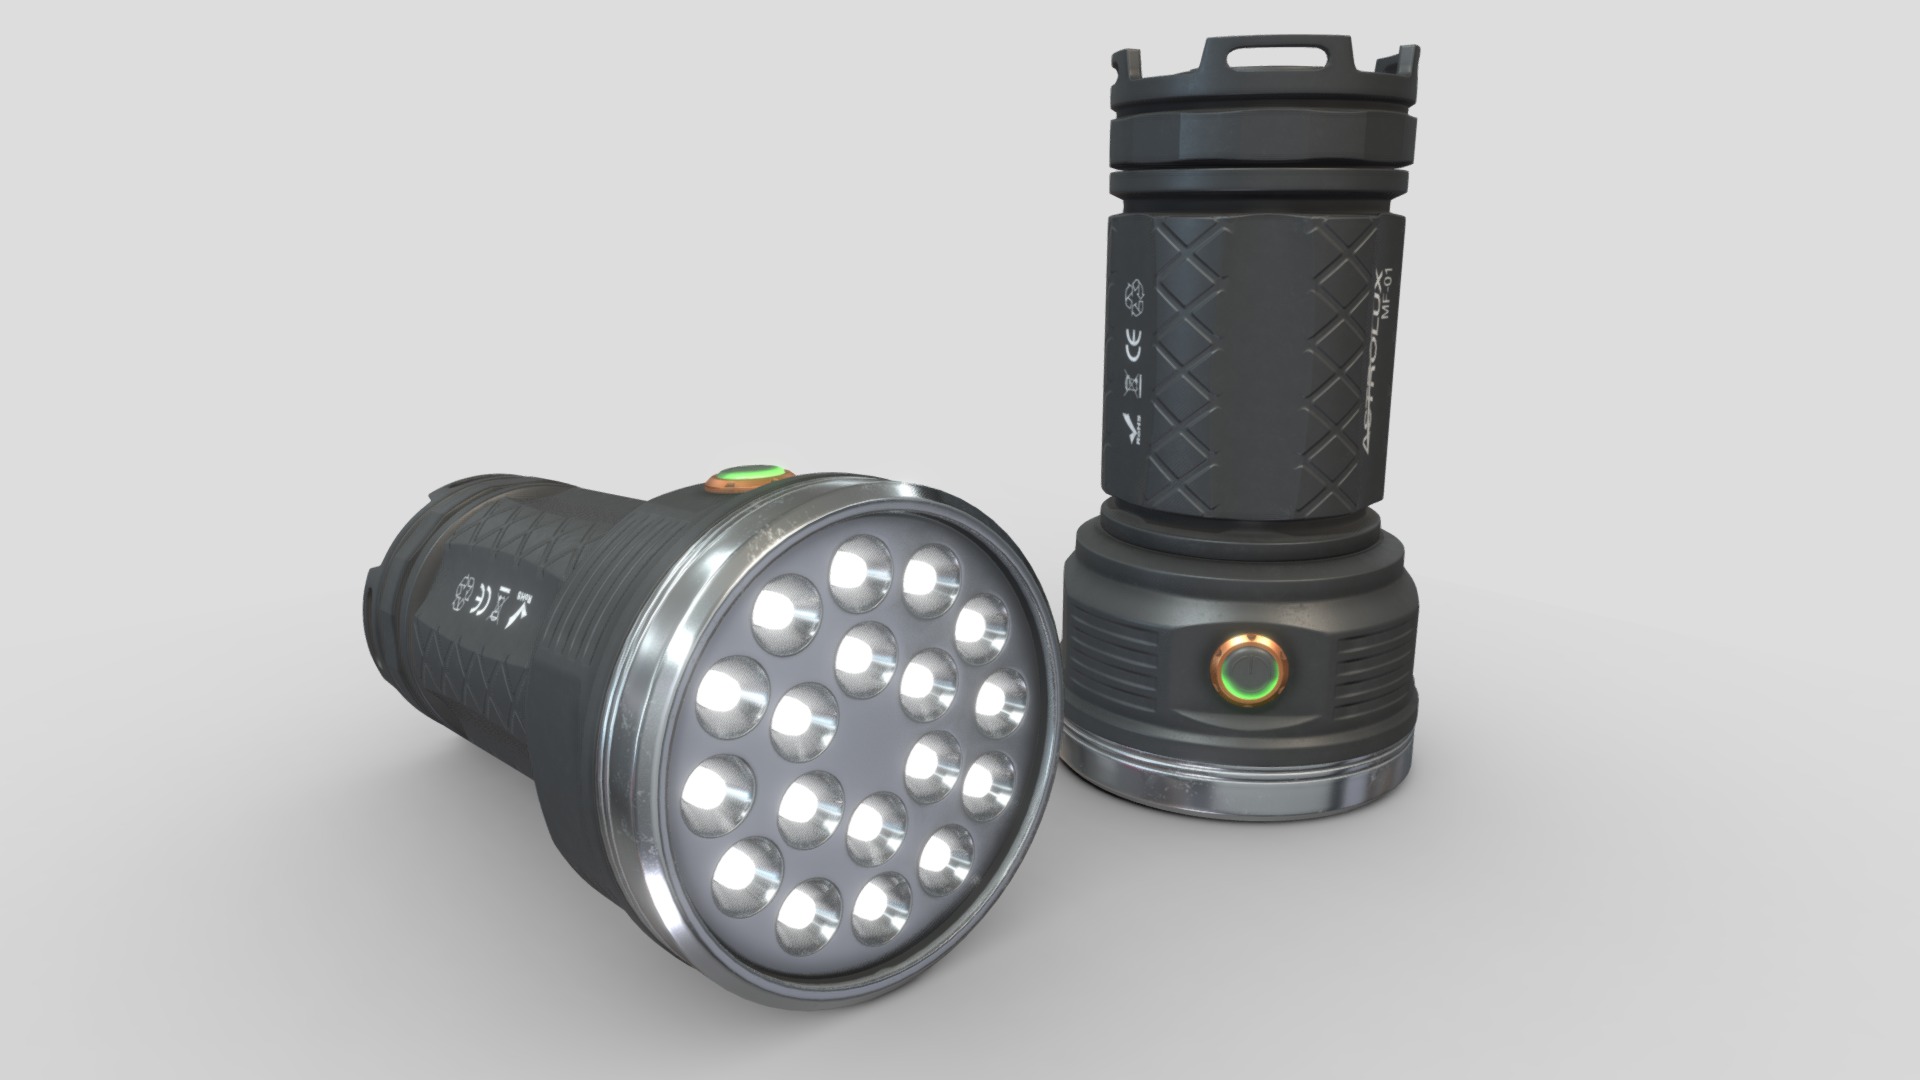 3D model Flashlight Astrolux MF01 - This is a 3D model of the Flashlight Astrolux MF01. The 3D model is about a couple of black and silver camera lenses.